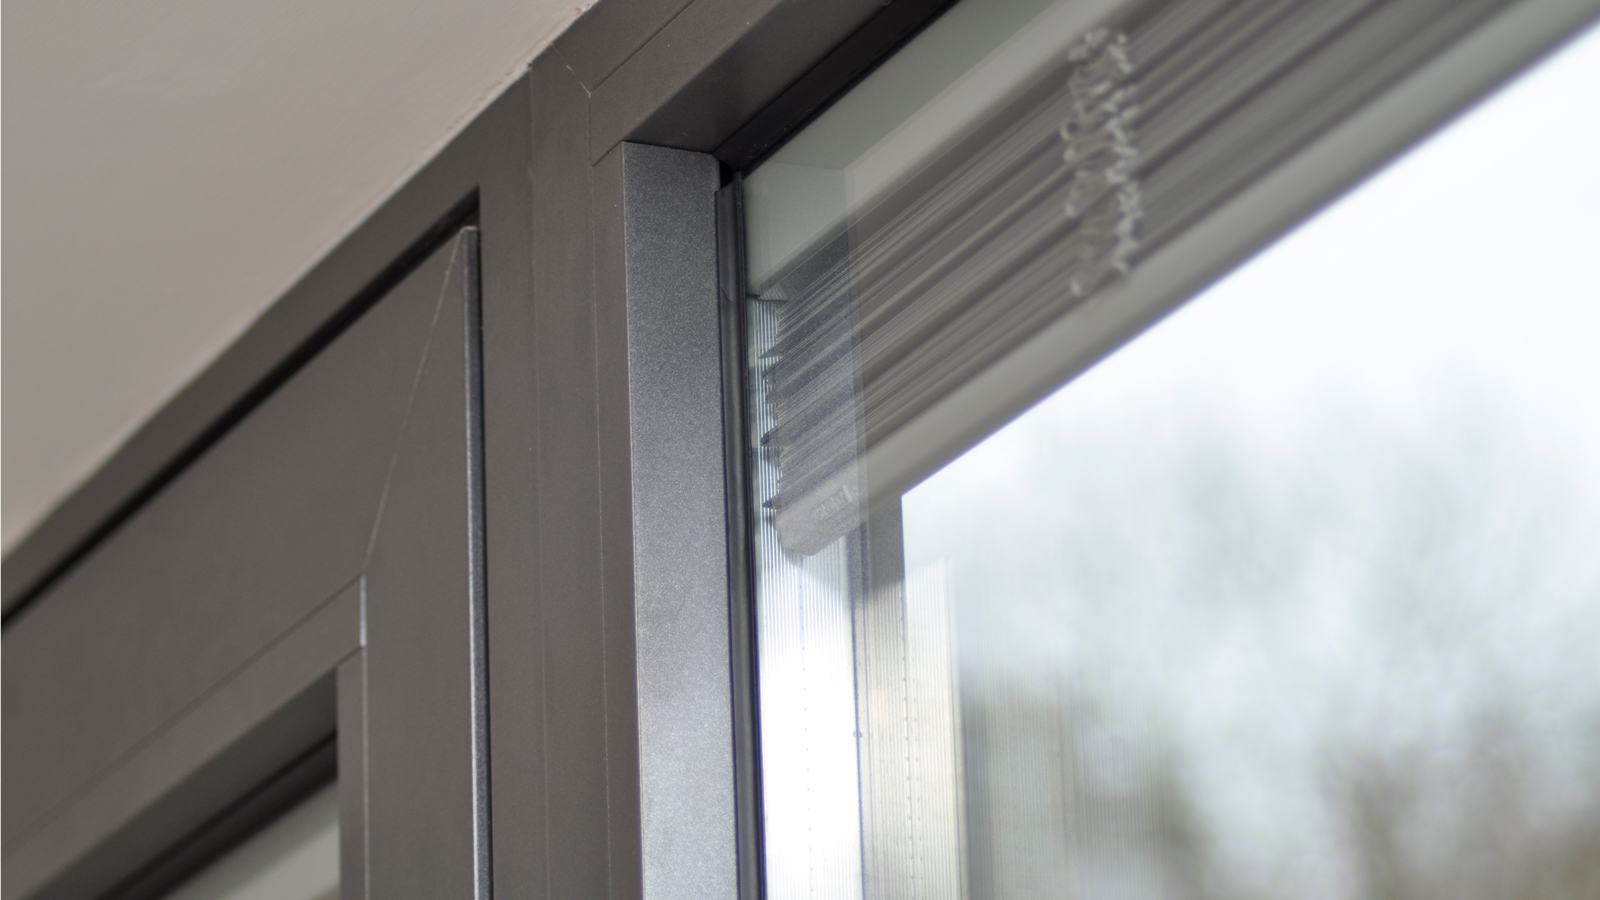 Add internal blinds between within your glazed units for added privacy